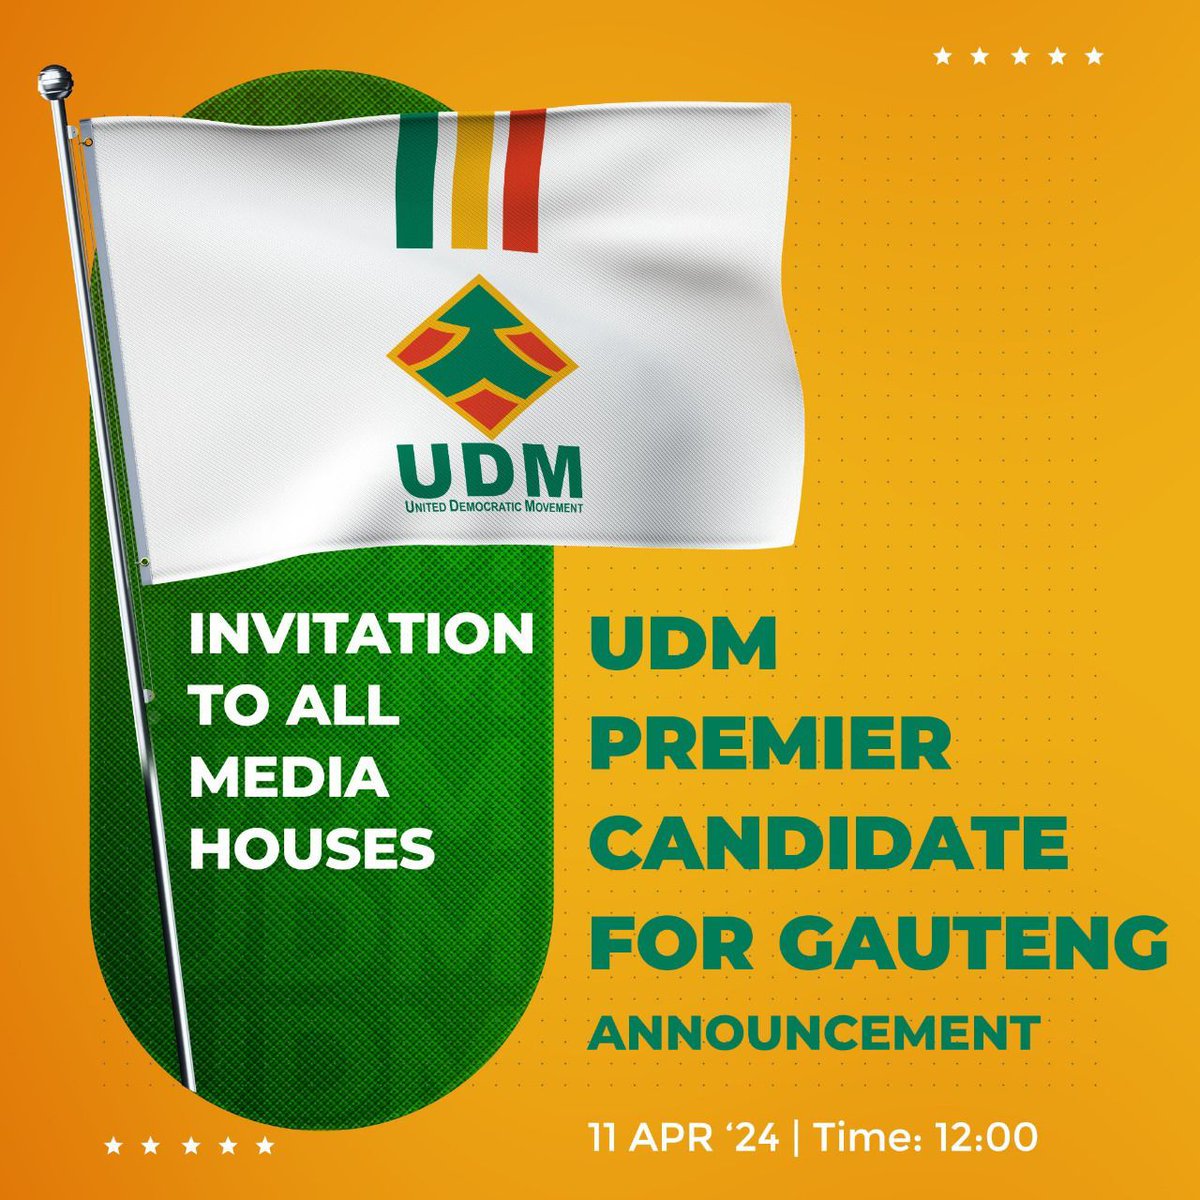 [ANOUNCEMENT] Tune in, today, 11 April 2024, @ 12:00 as the United Democratic Movement will announce the party’s premier candidate for Gauteng live on facebook.com/bantu.holomisa